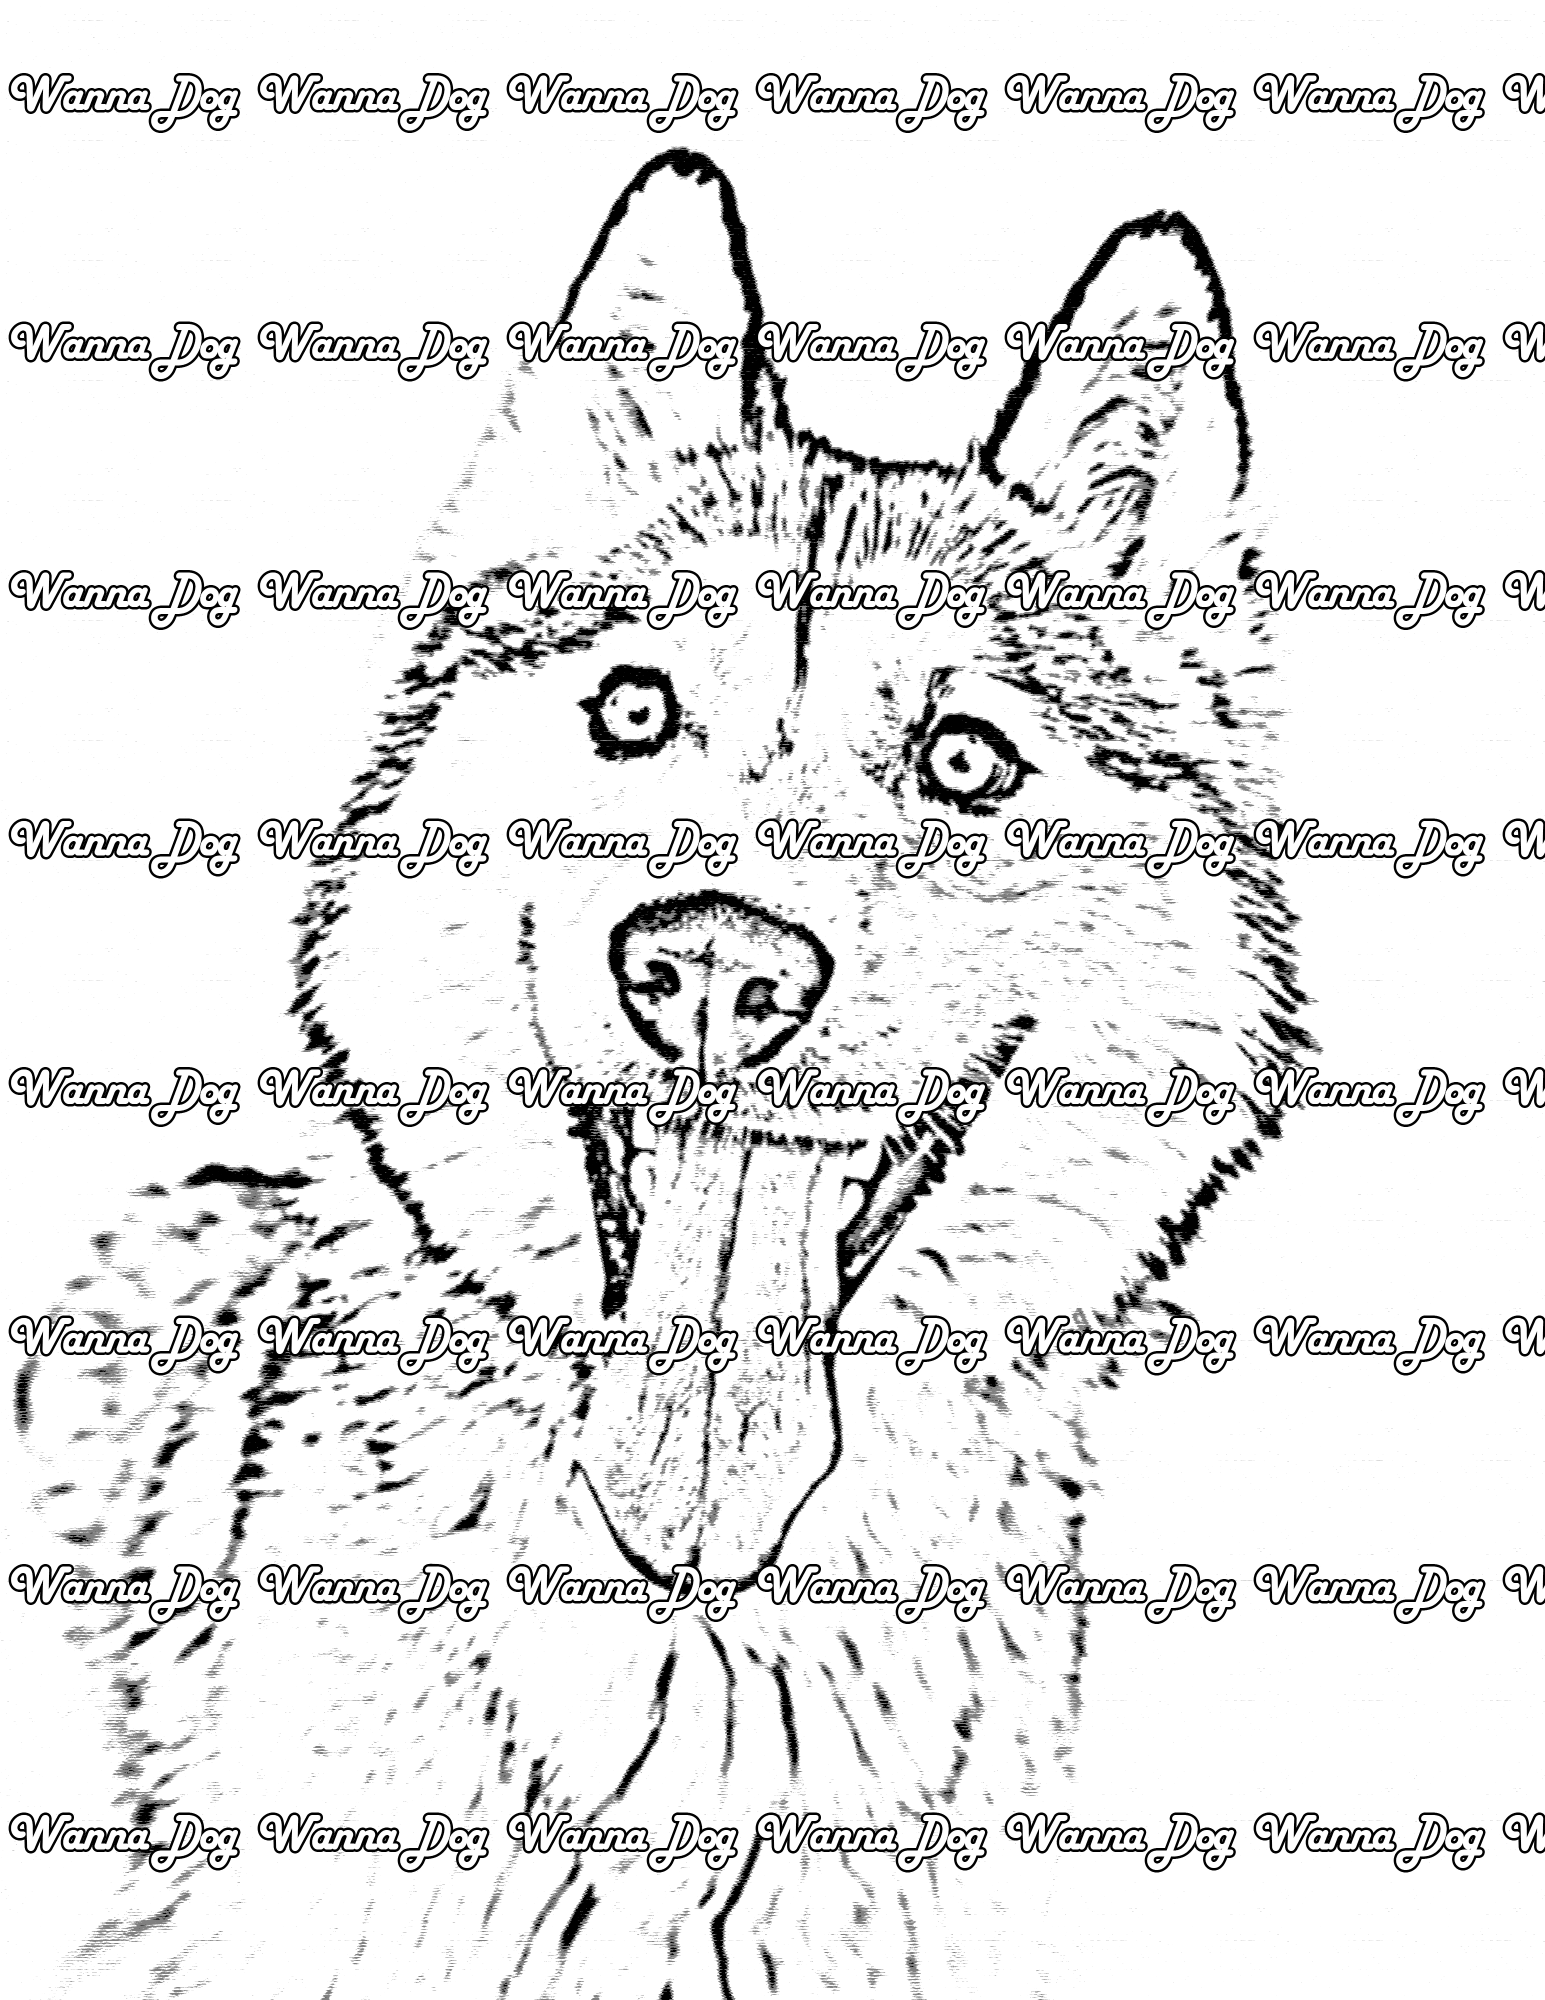 Siberian Husky Coloring Page of a Siberian Husky smiling with their tongue out